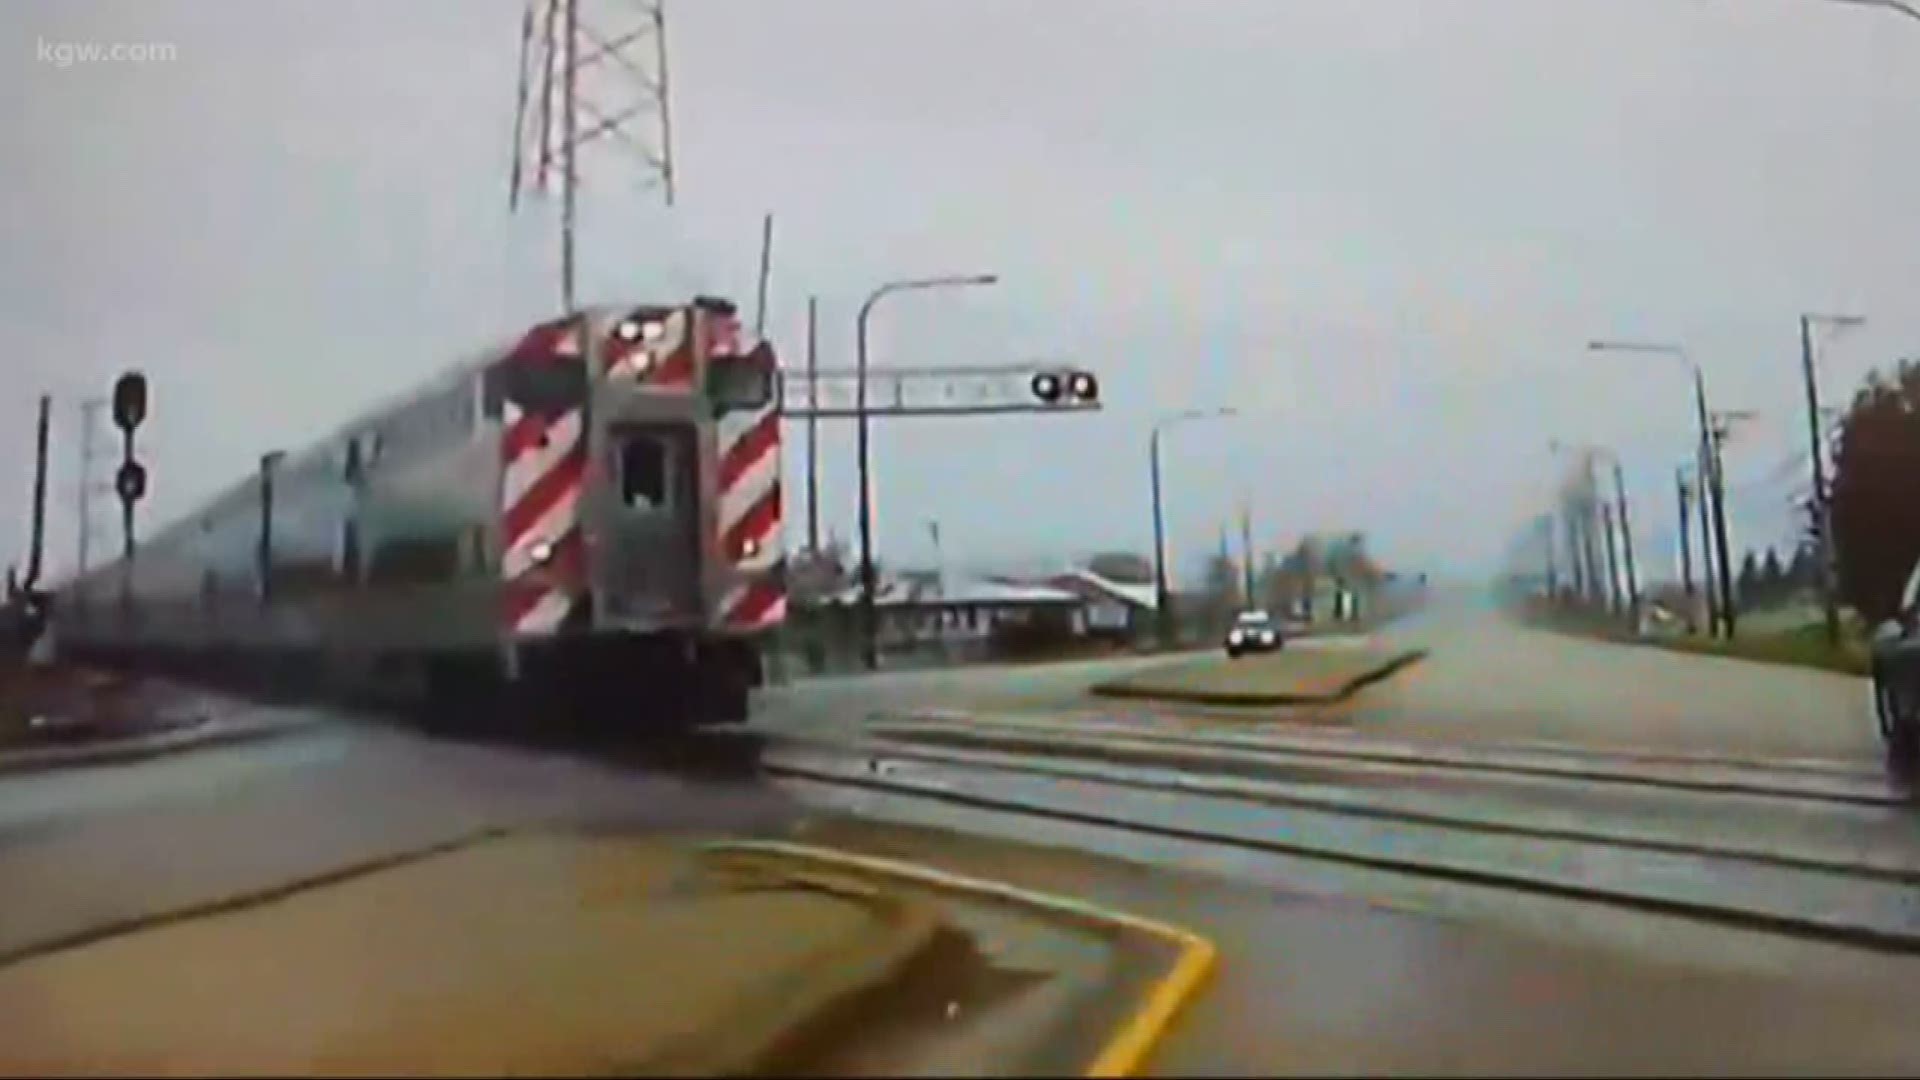 Train nearly hits two cars at crossing with failed warnings